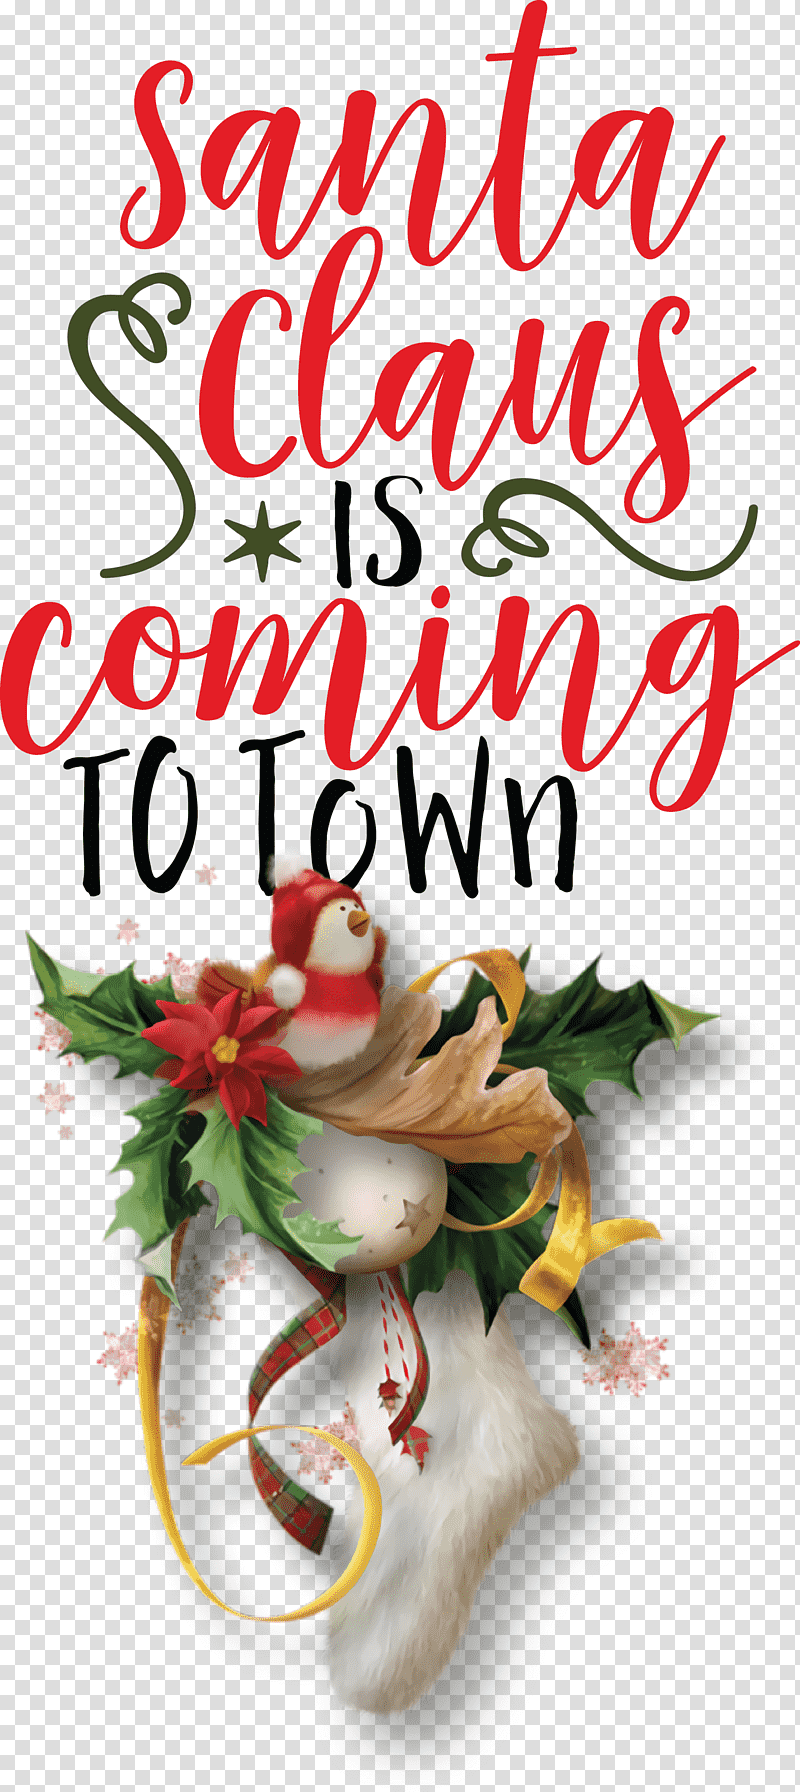 Santa Claus is coming Santa Claus Christmas, Christmas , Christmas Day, Tela, Highdefinition Video, Christmas Ornament, Holiday transparent background PNG clipart